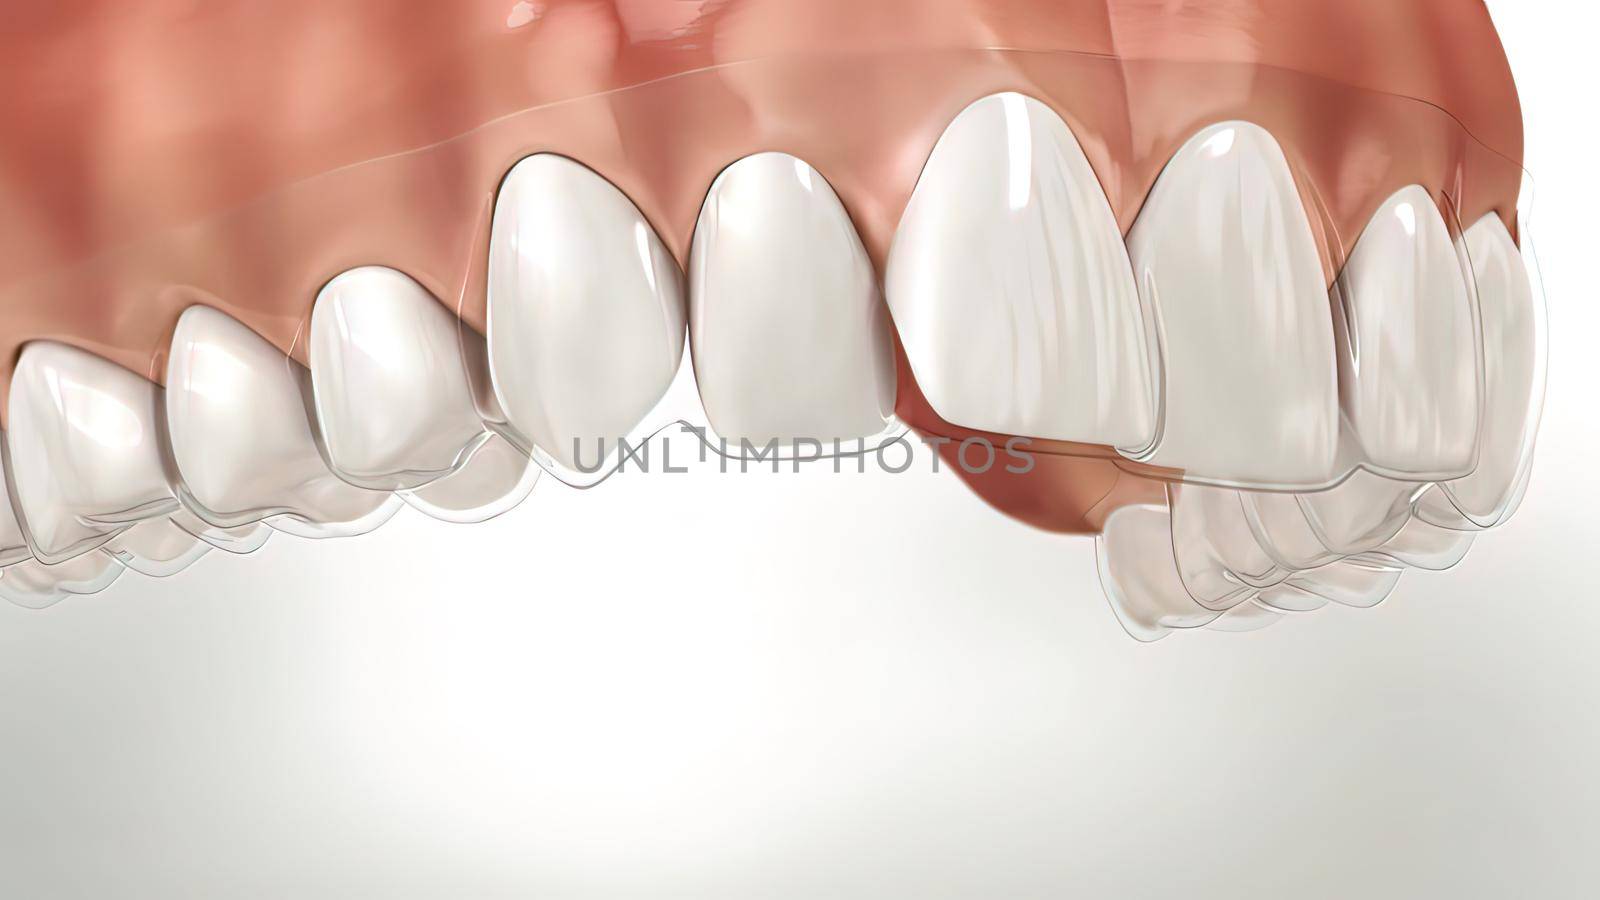 Invisalign braces or invisible retainer make bite correction. Medically accurate .3D illustration